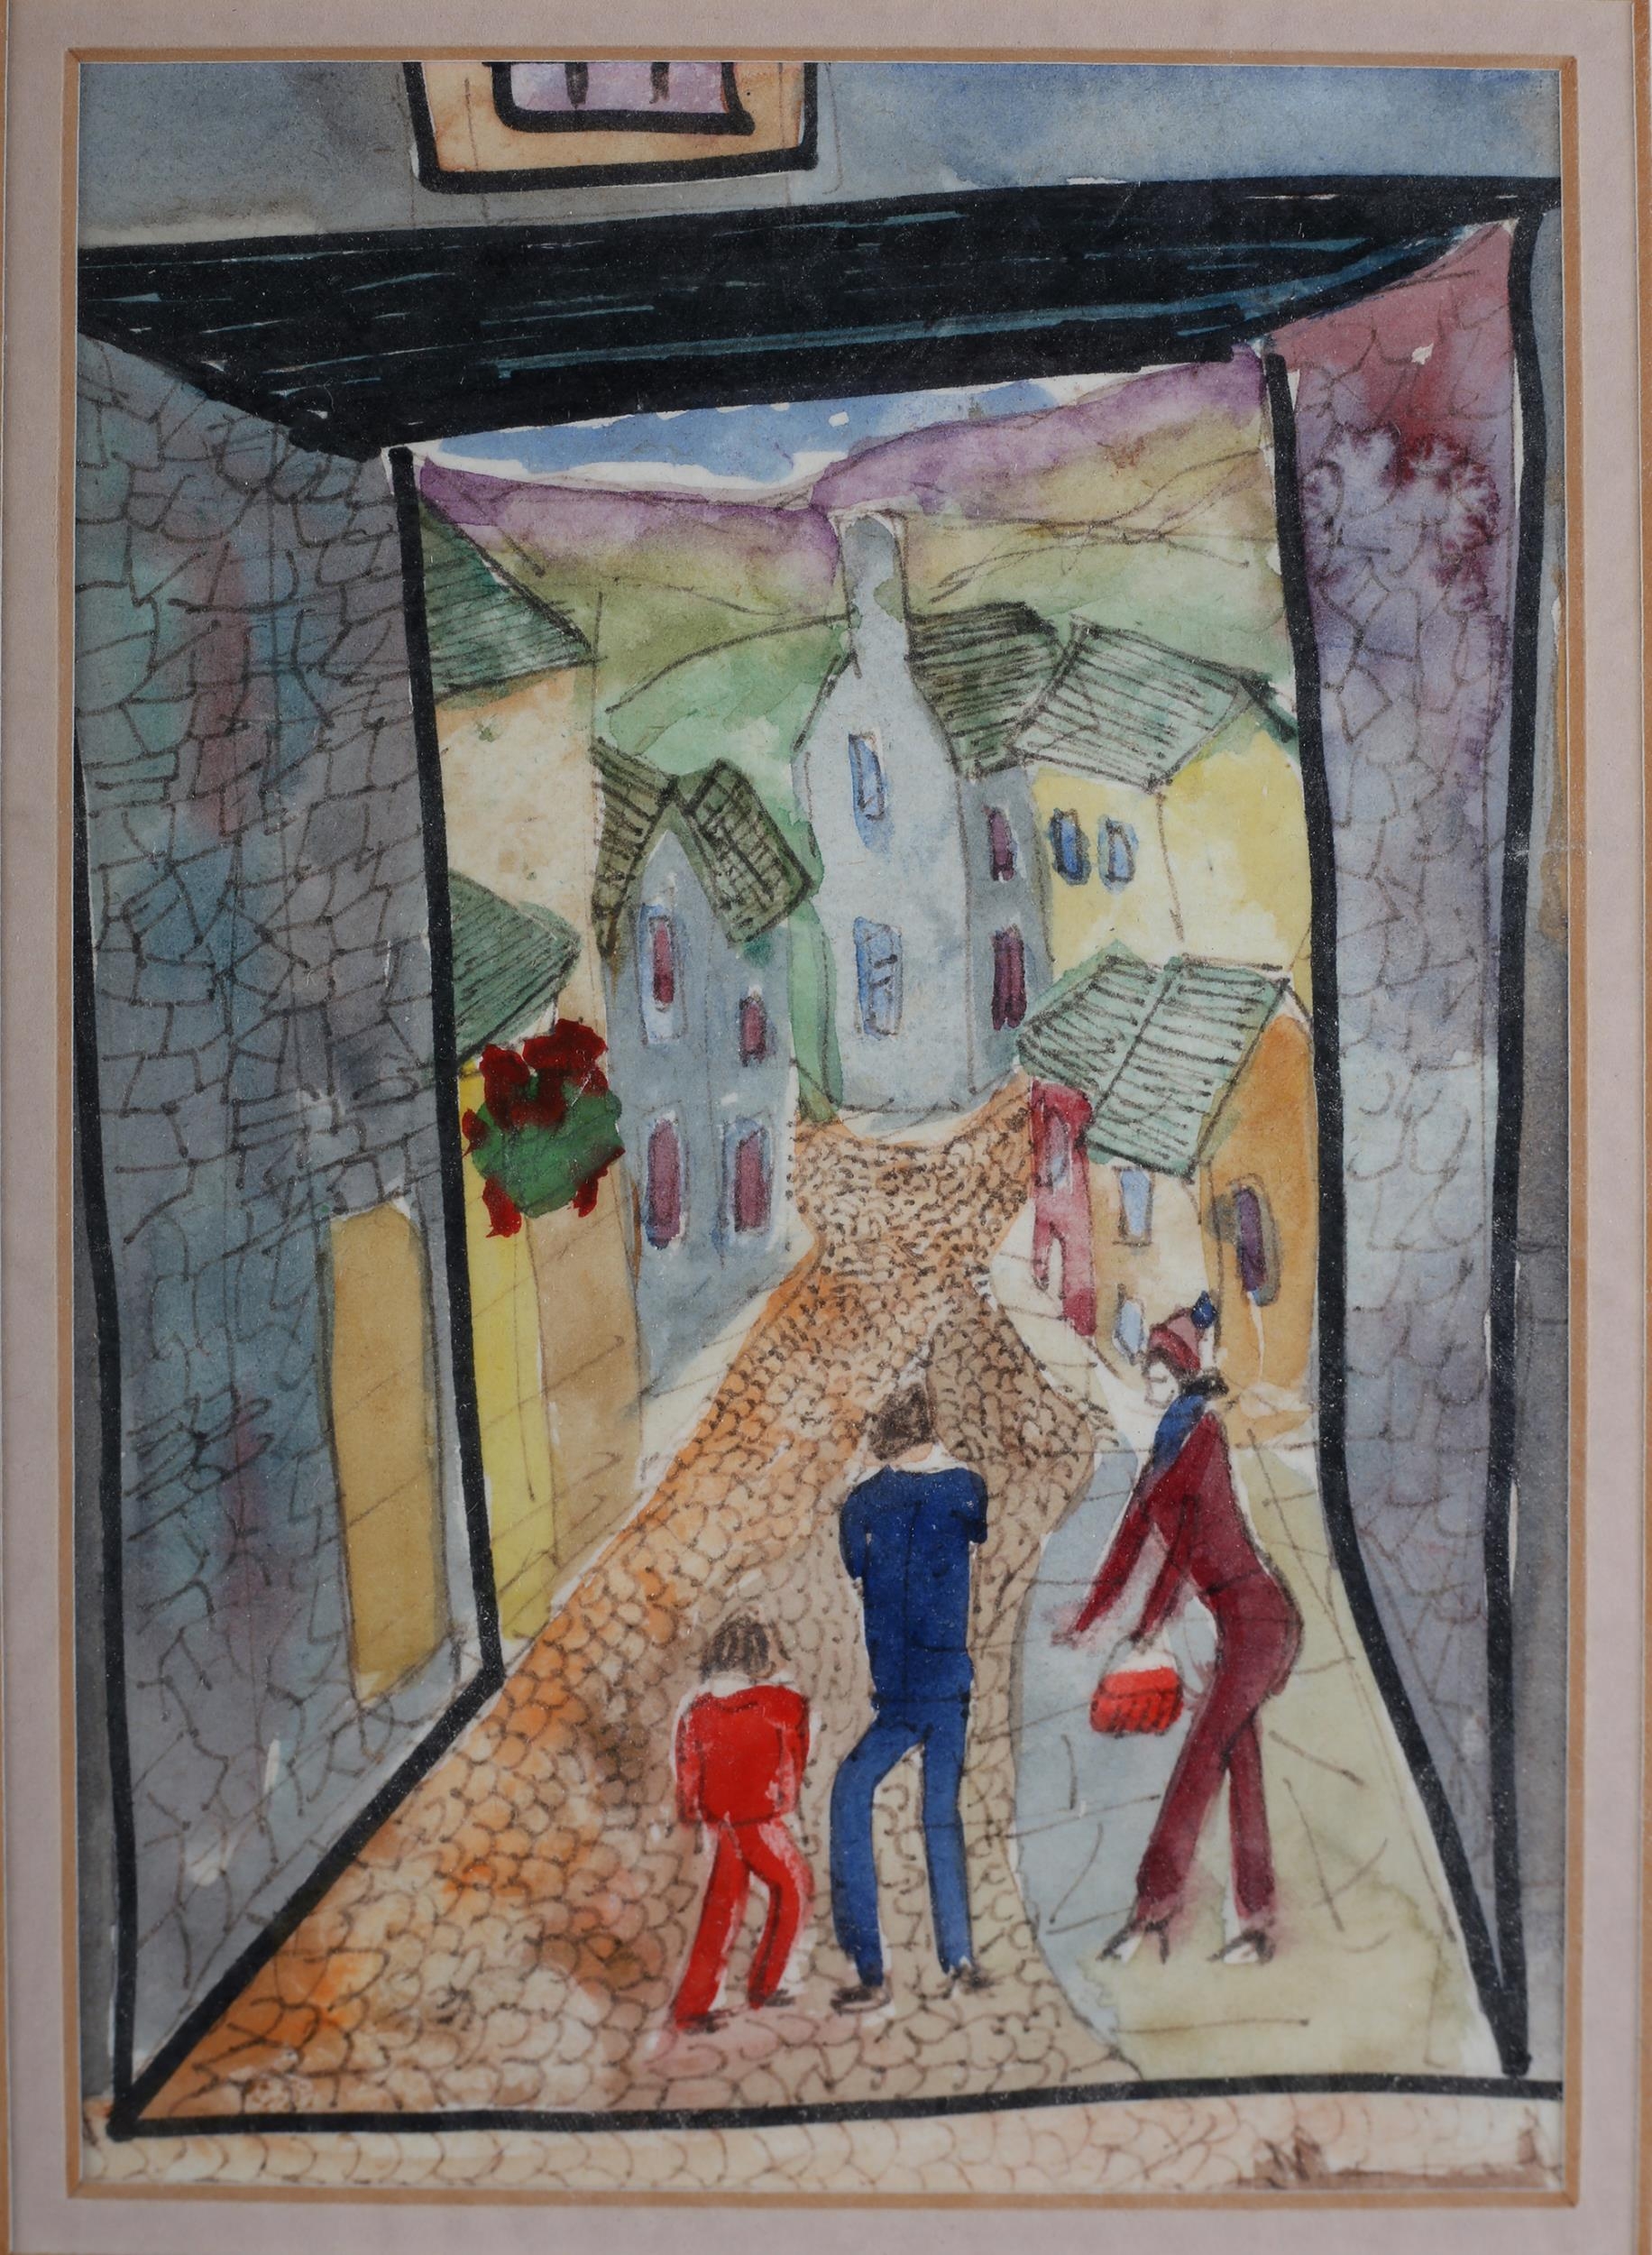 ARR Lois Bygrave (1915-1996), Dales Street scene, mixed media, signed, titled and dated 1984 - Image 2 of 3